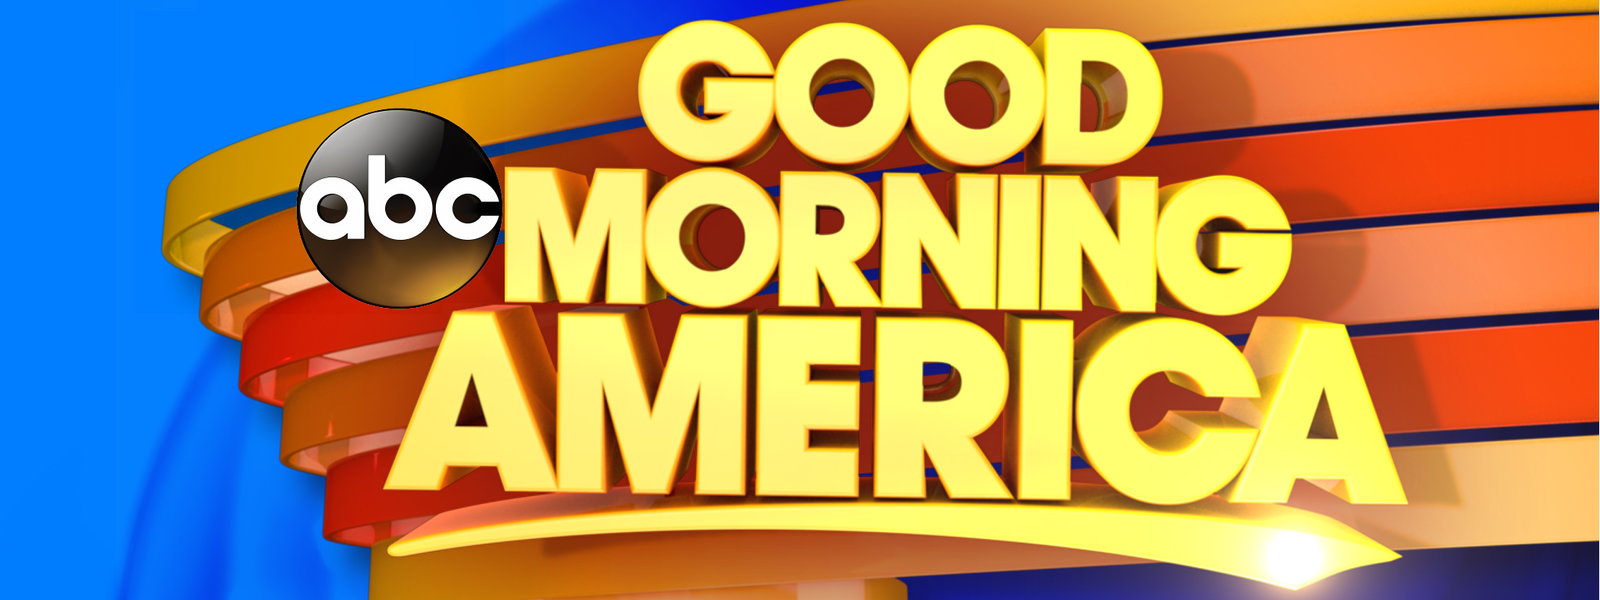 Good Morning America Talk Show to Celebrate 40Year Anniversary with